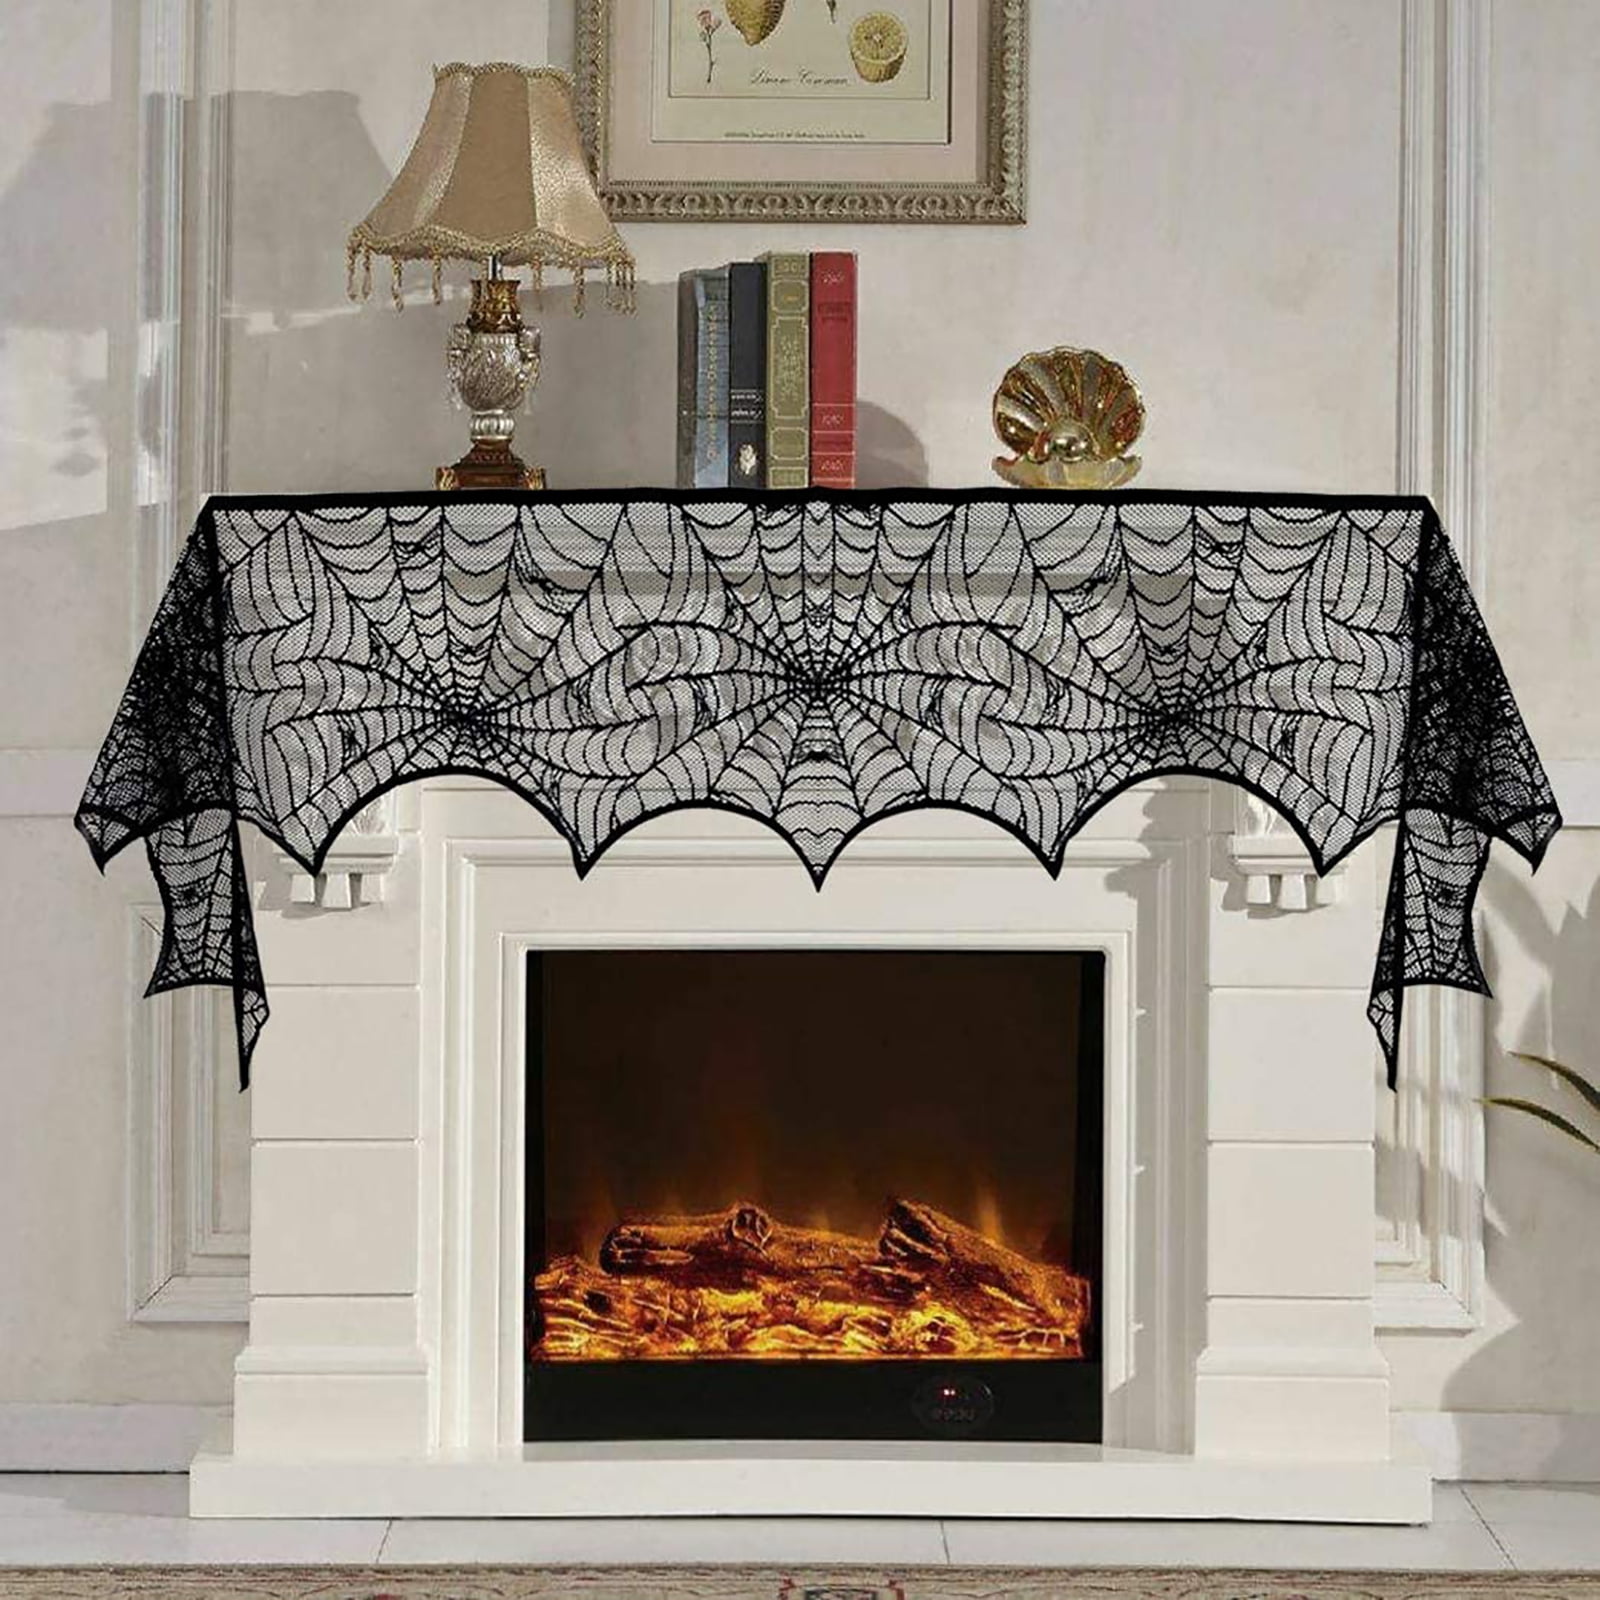 Pompotops 40 Inch Halloween Decoration Tablecloth Black Spider